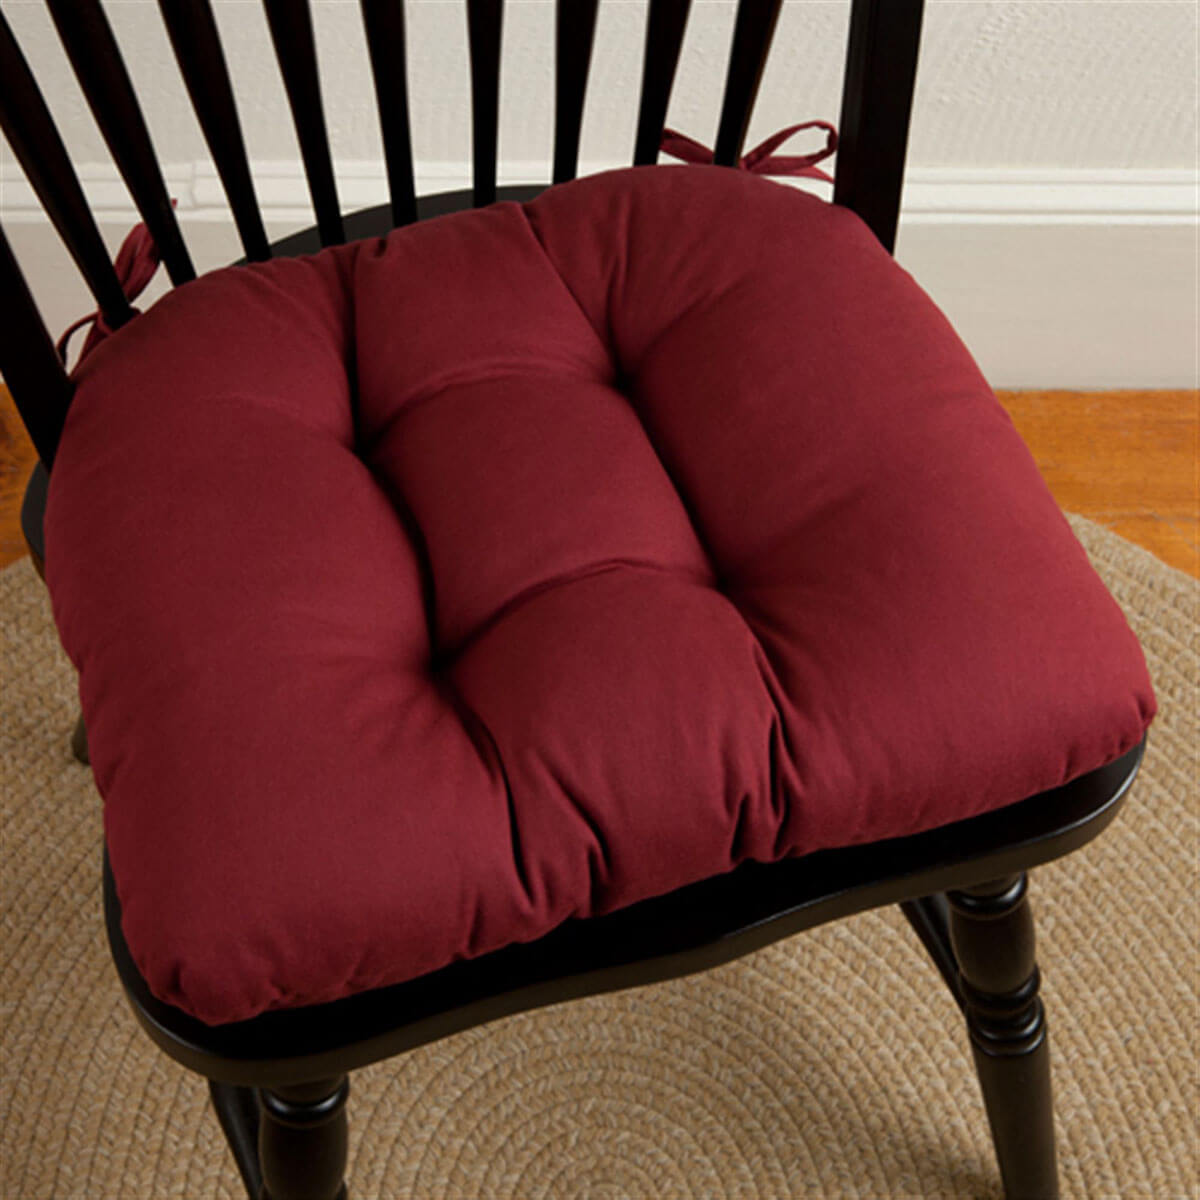 extra thick chair pad in wine red on black windsor dining chair